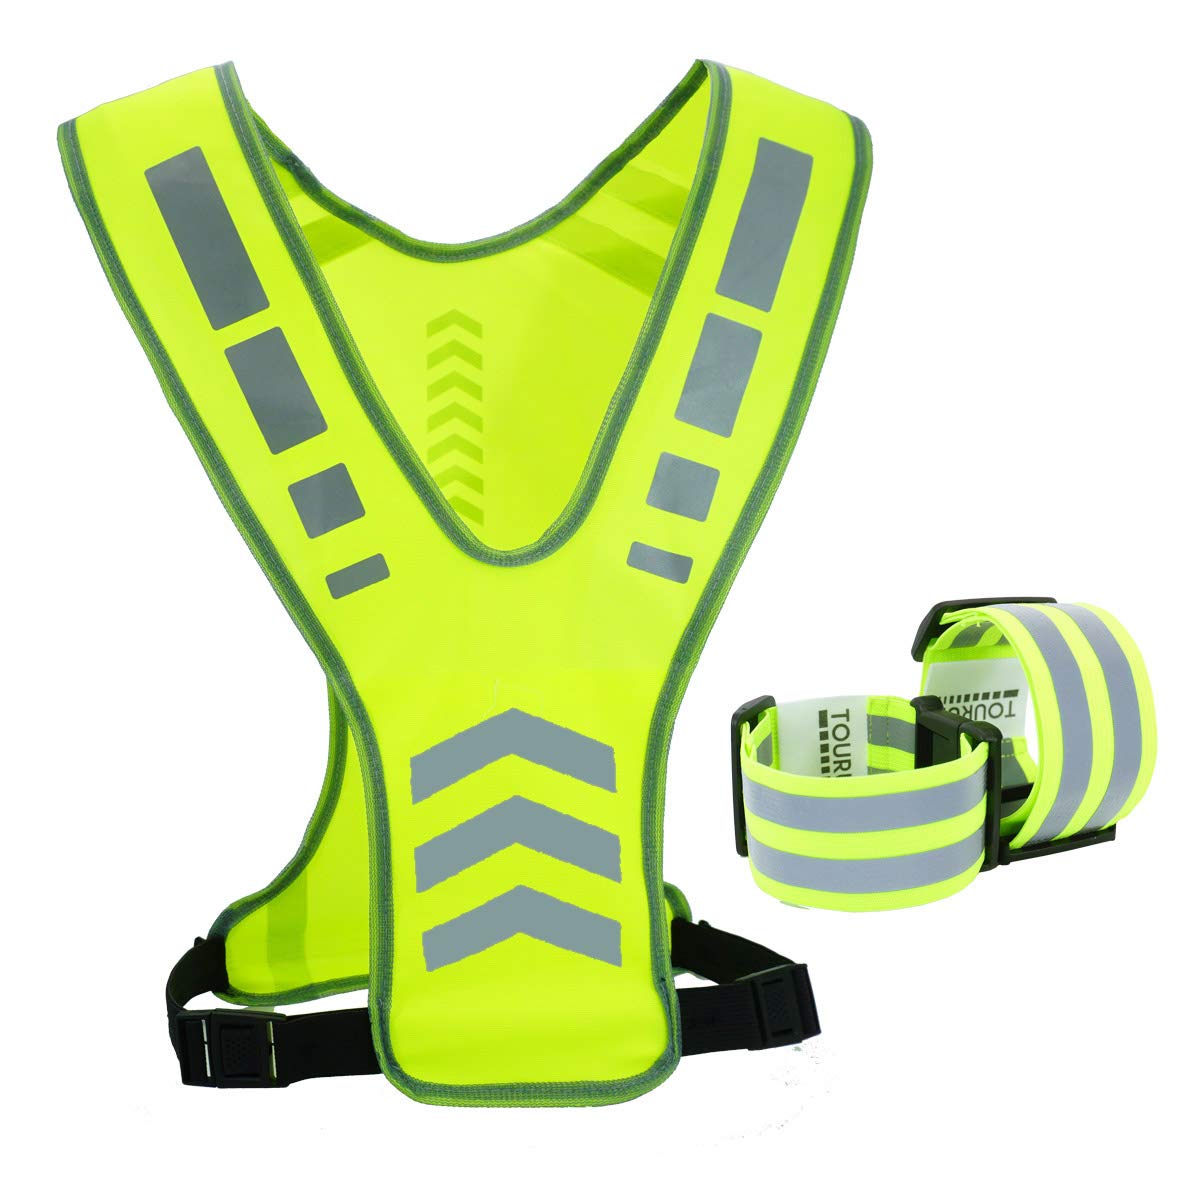 TOURUN Reflective Running Vest Gear with Pocket for Women Men Kids, Safety Reflective Vest Bands for Night Cycling Walking Bicycle Jogging